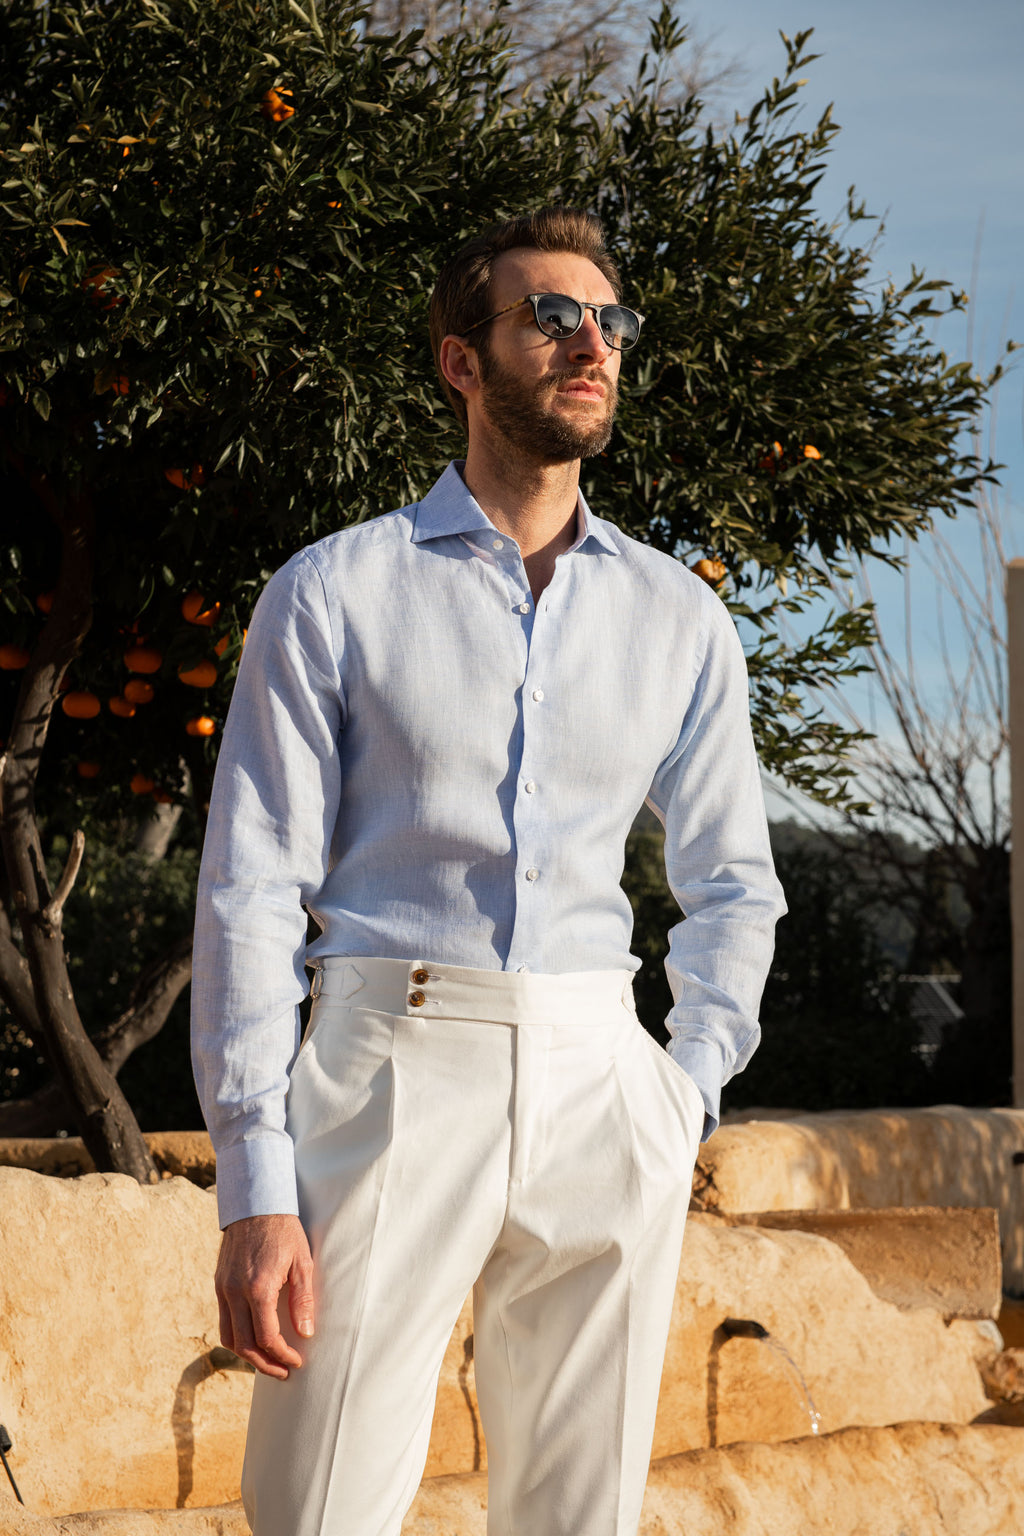 Black linen shirt - Made in Italy